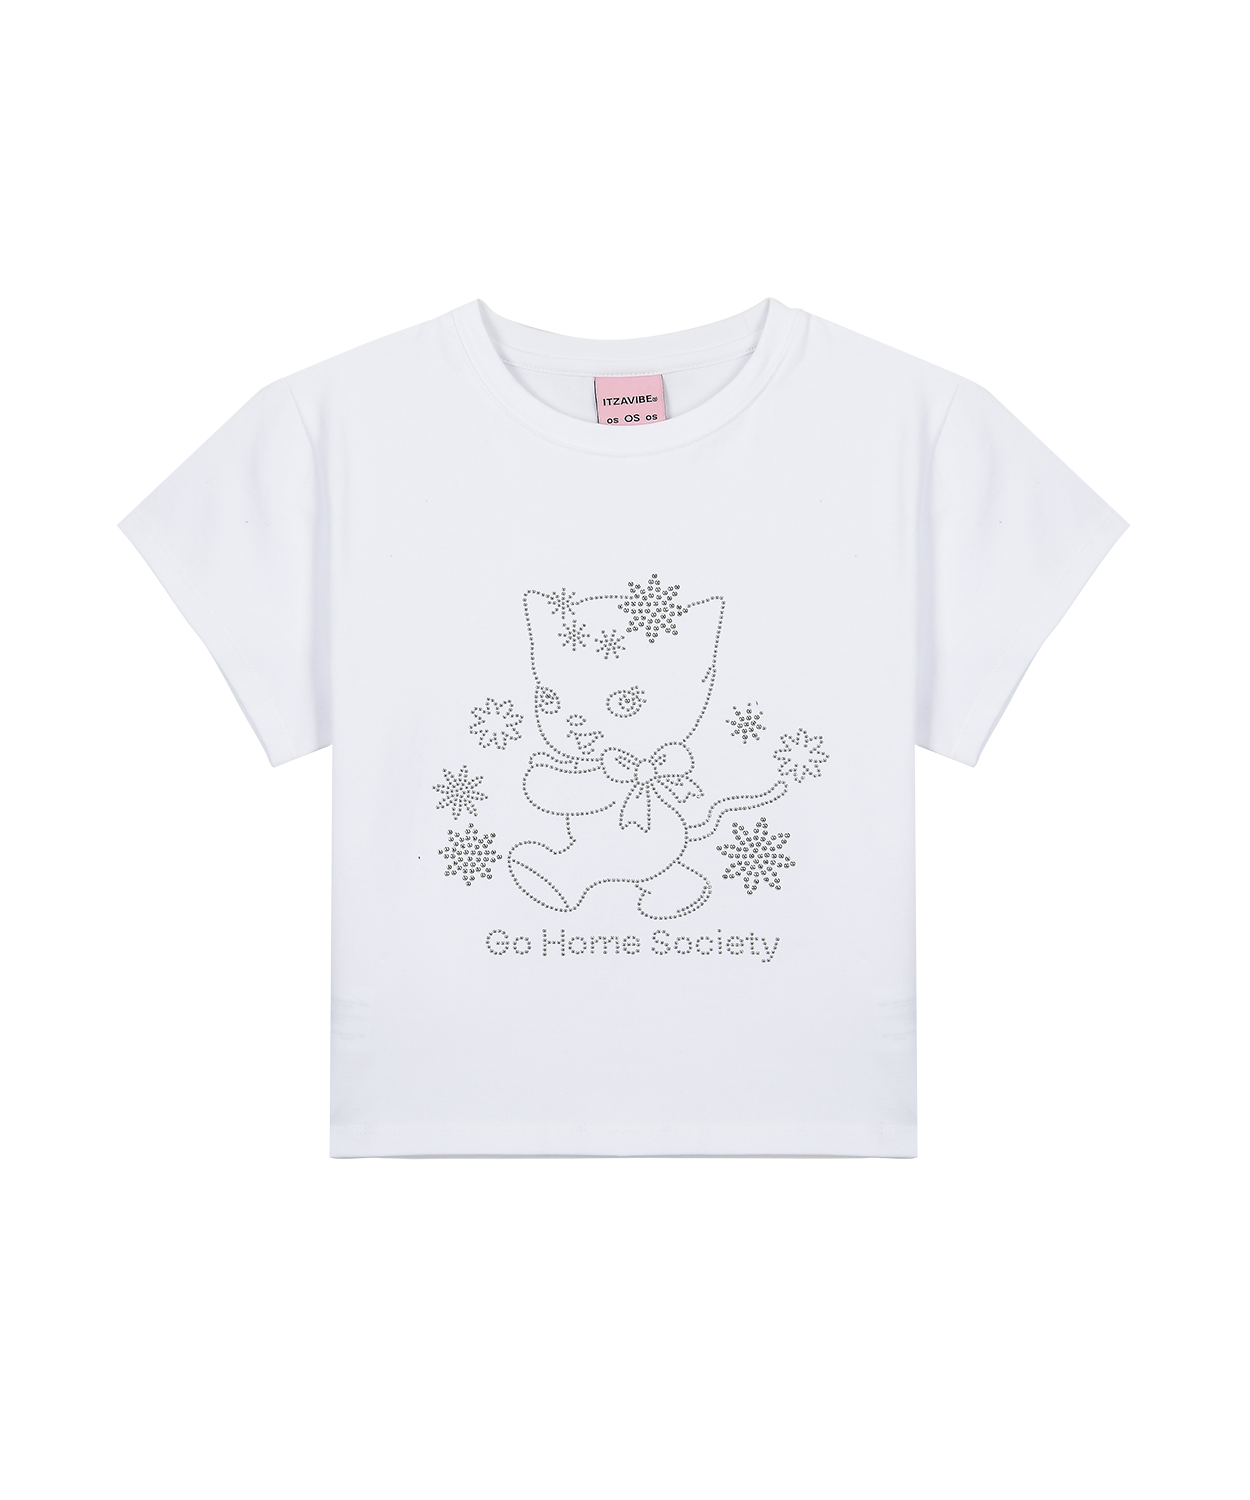 [IBA23WT18WH] GO HOME SOCIETY CAT CROP T SHIRT - WHITE